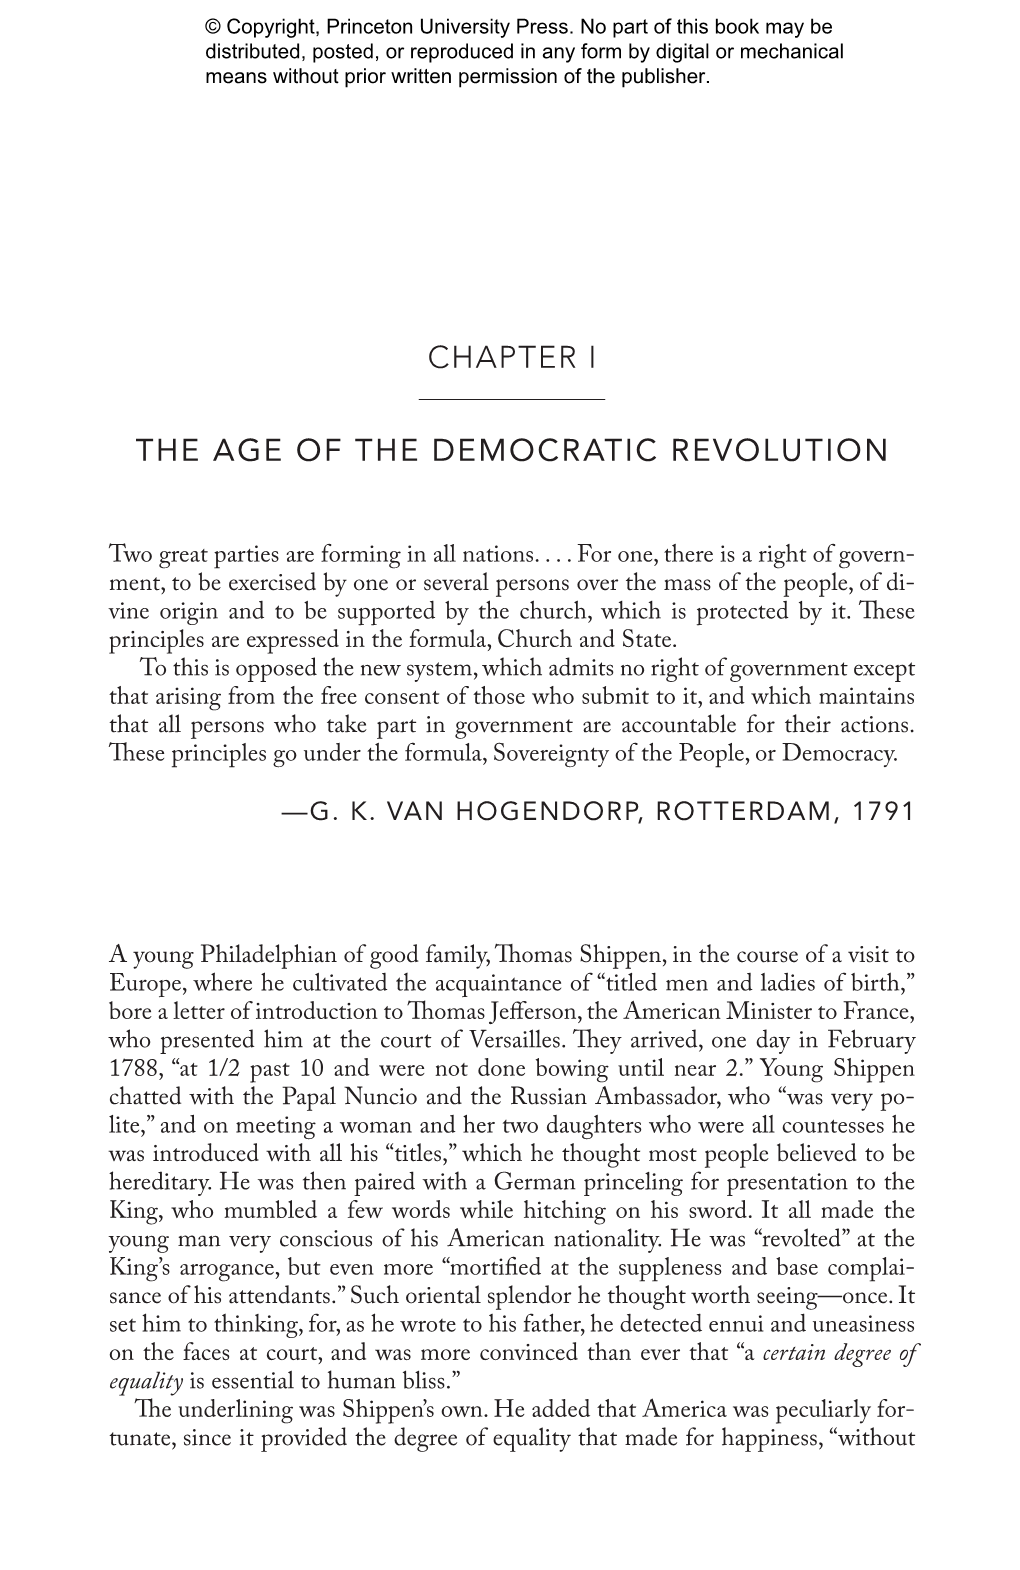 Chapter I the Age of the Democratic Revolution